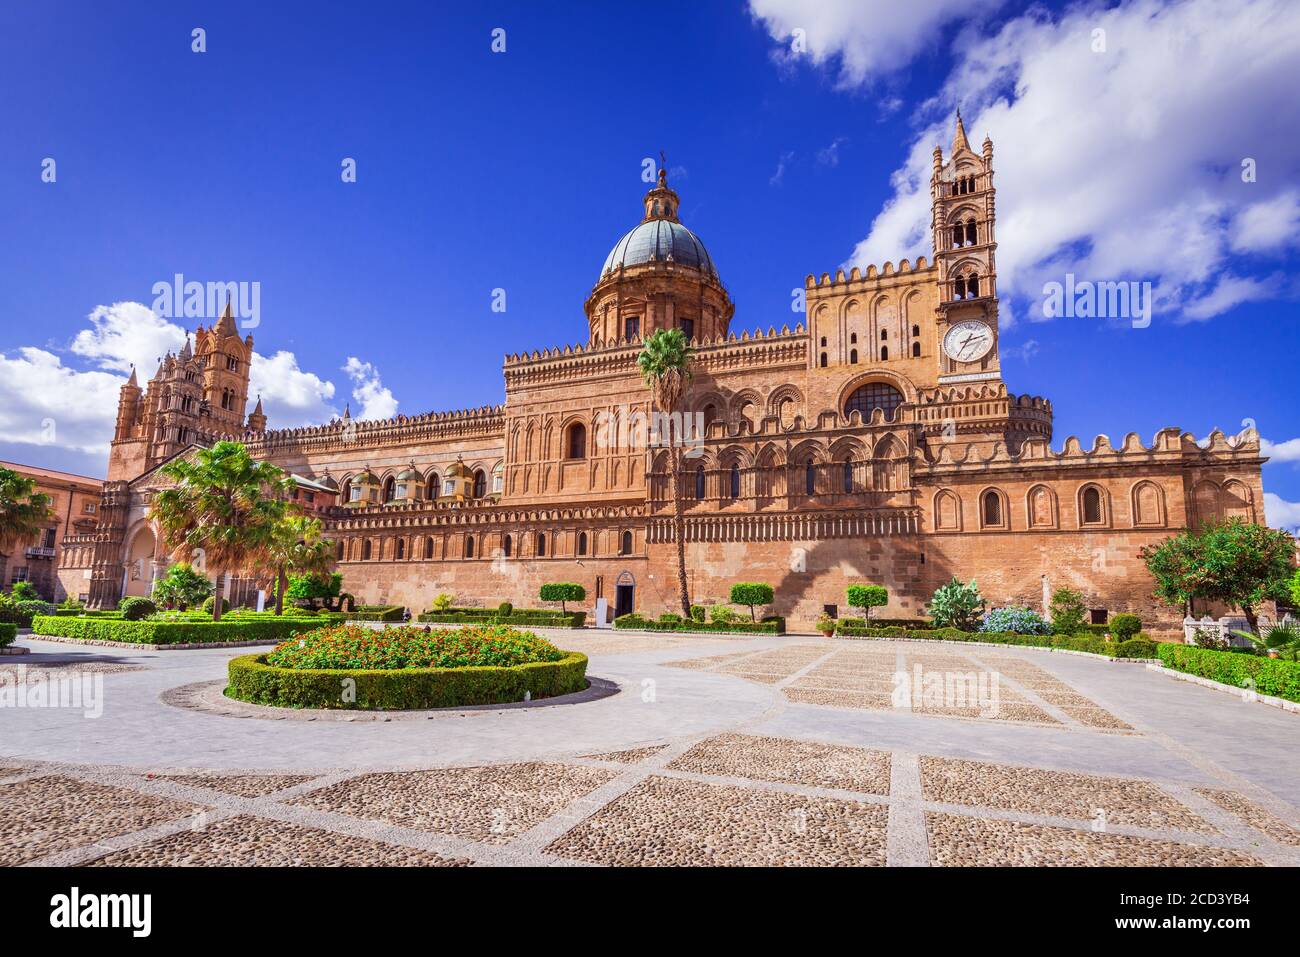 Palermo, Sicilia. Sunny Norman Cathedral of Sicily, medieval Italy. Stock Photo